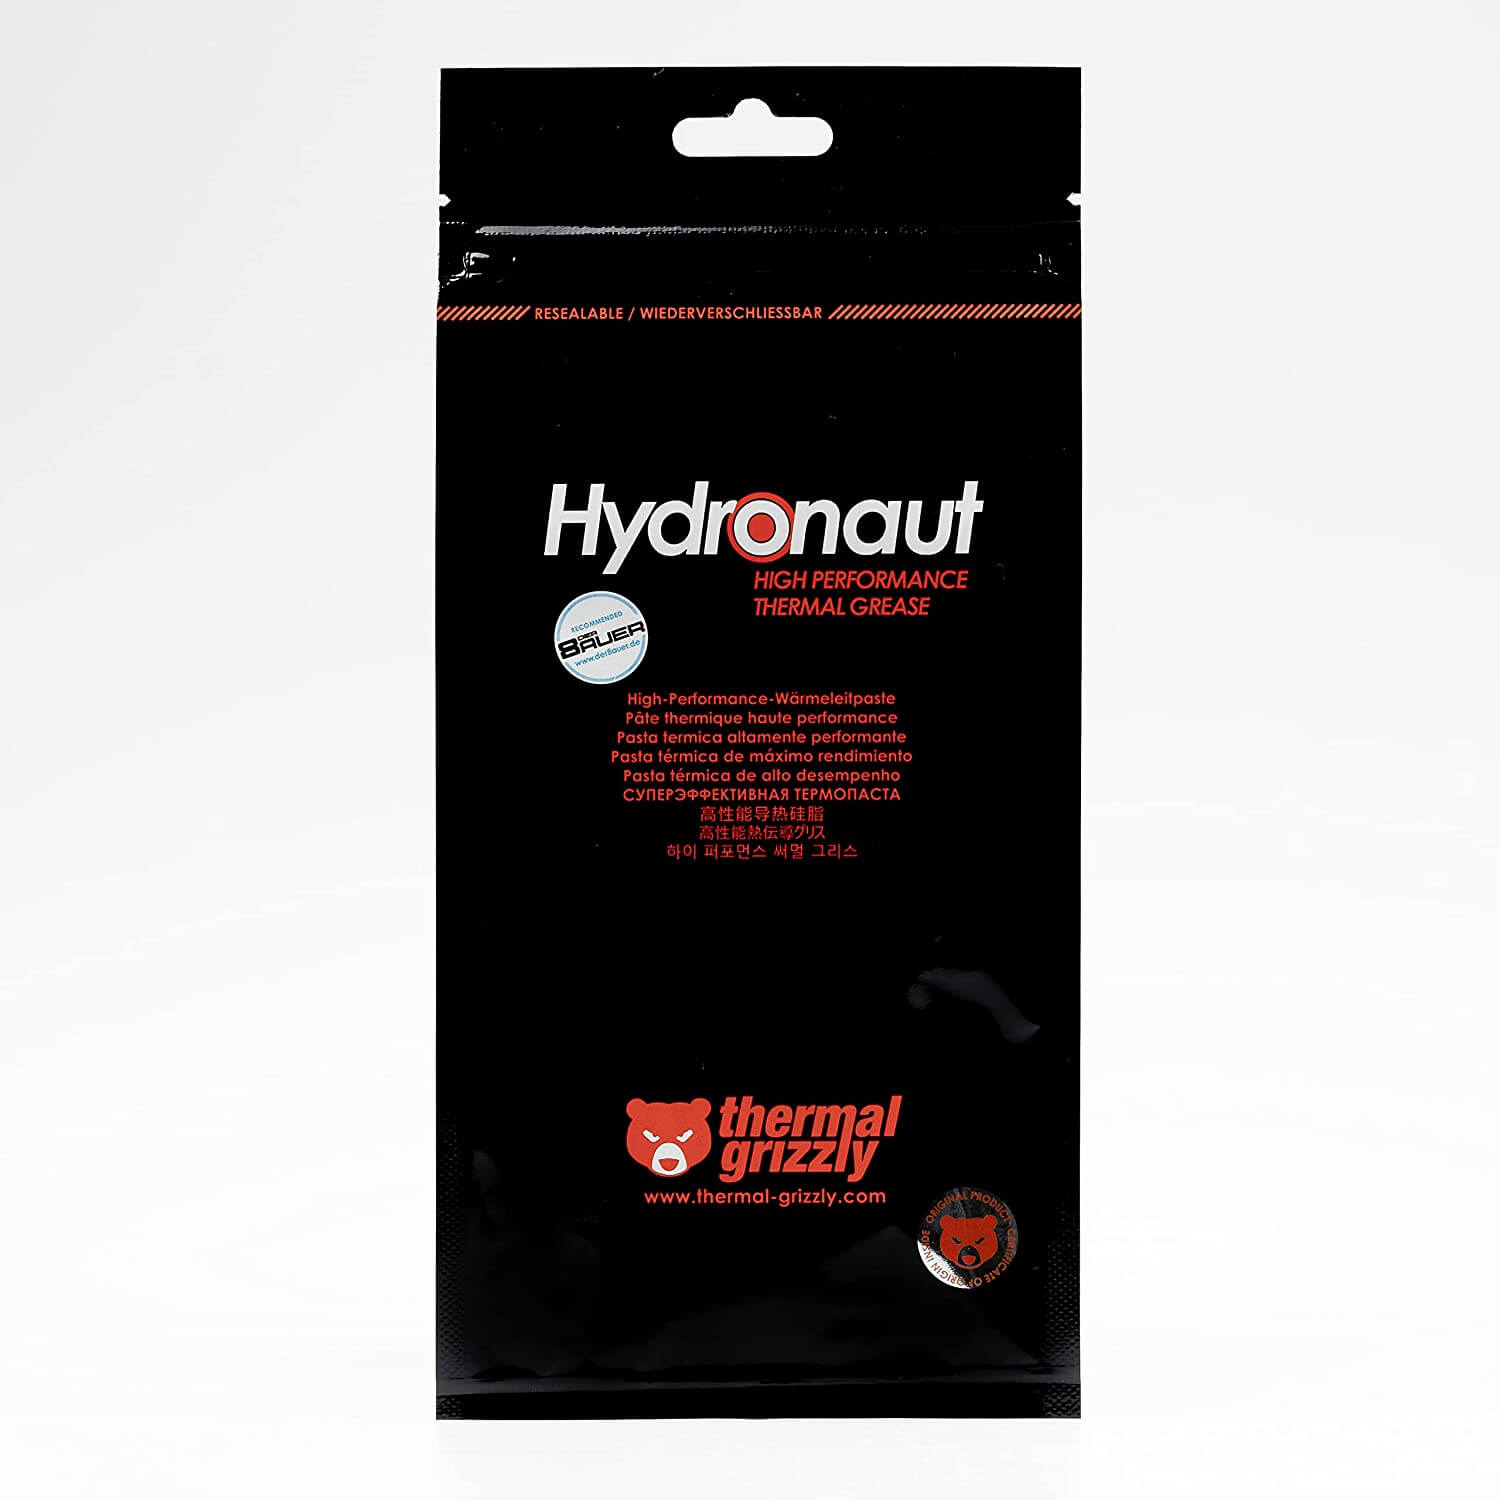 THERMAL GRIZZLY HYDRONAUT 4G